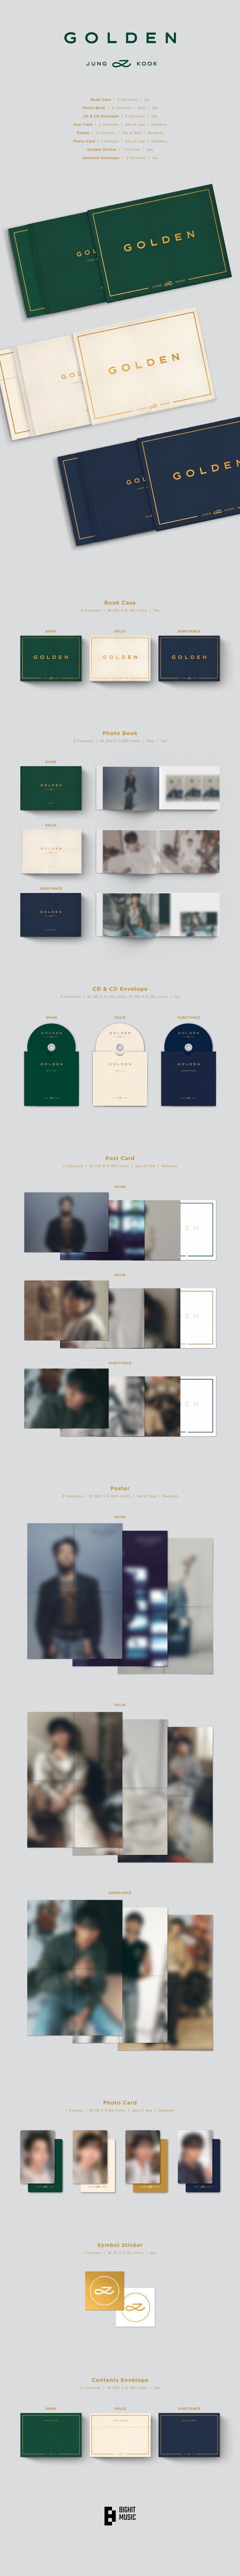 1 CD
1 Photo Book (64 pages)
2 Postcards (random out of 3 types)
1 Folded Poster (random out of 3 types)
2 Photo Cards (ra...